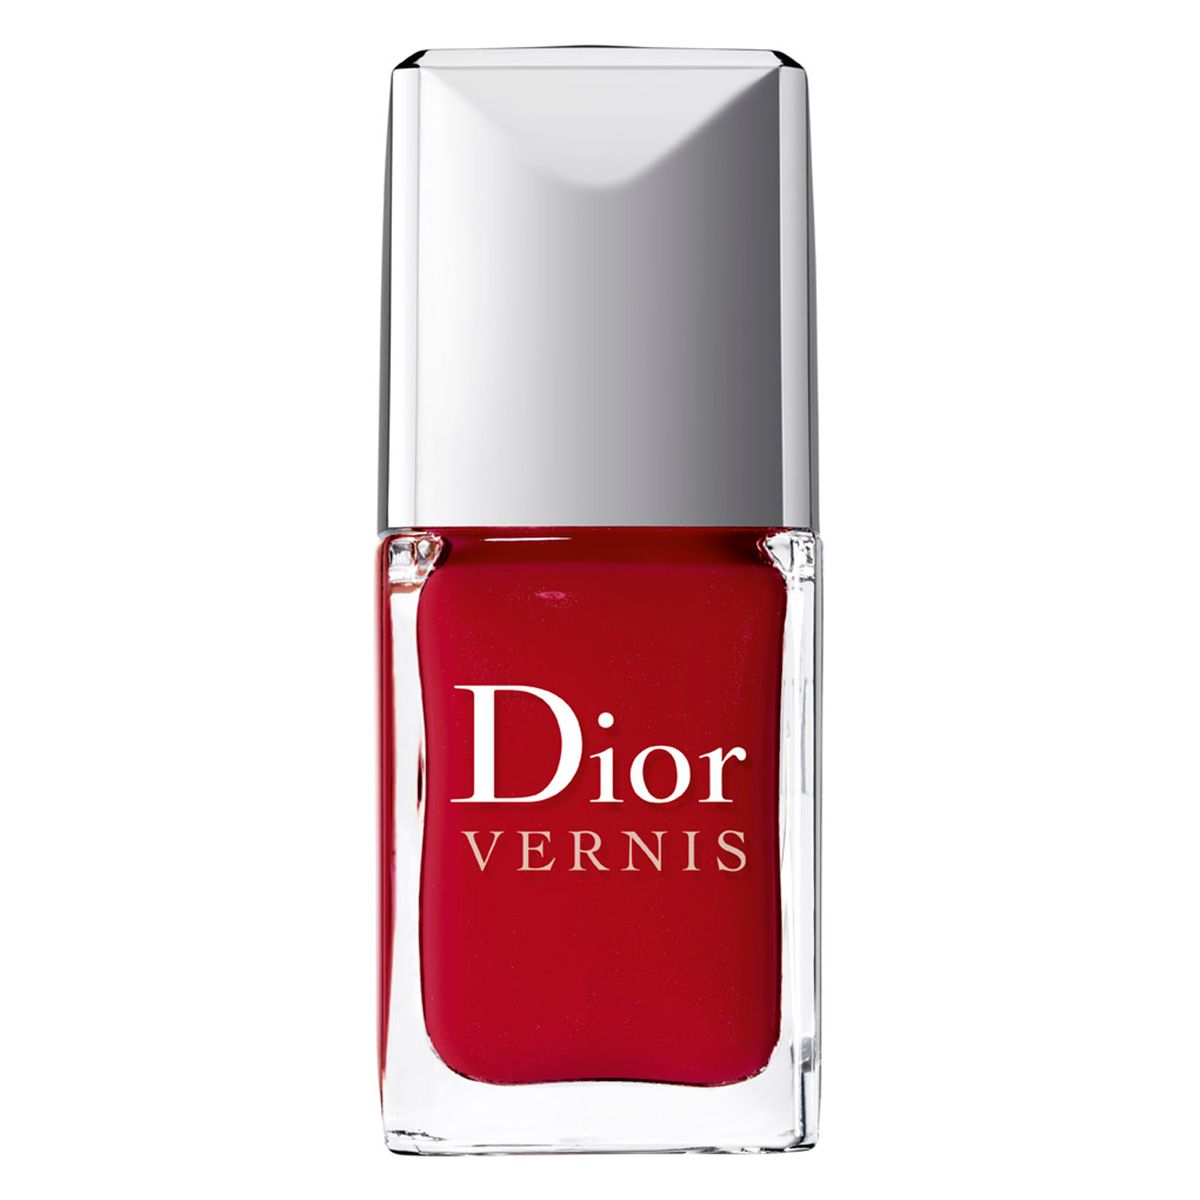 Dior Vernis - Long-Wearing Nail Lacquer 